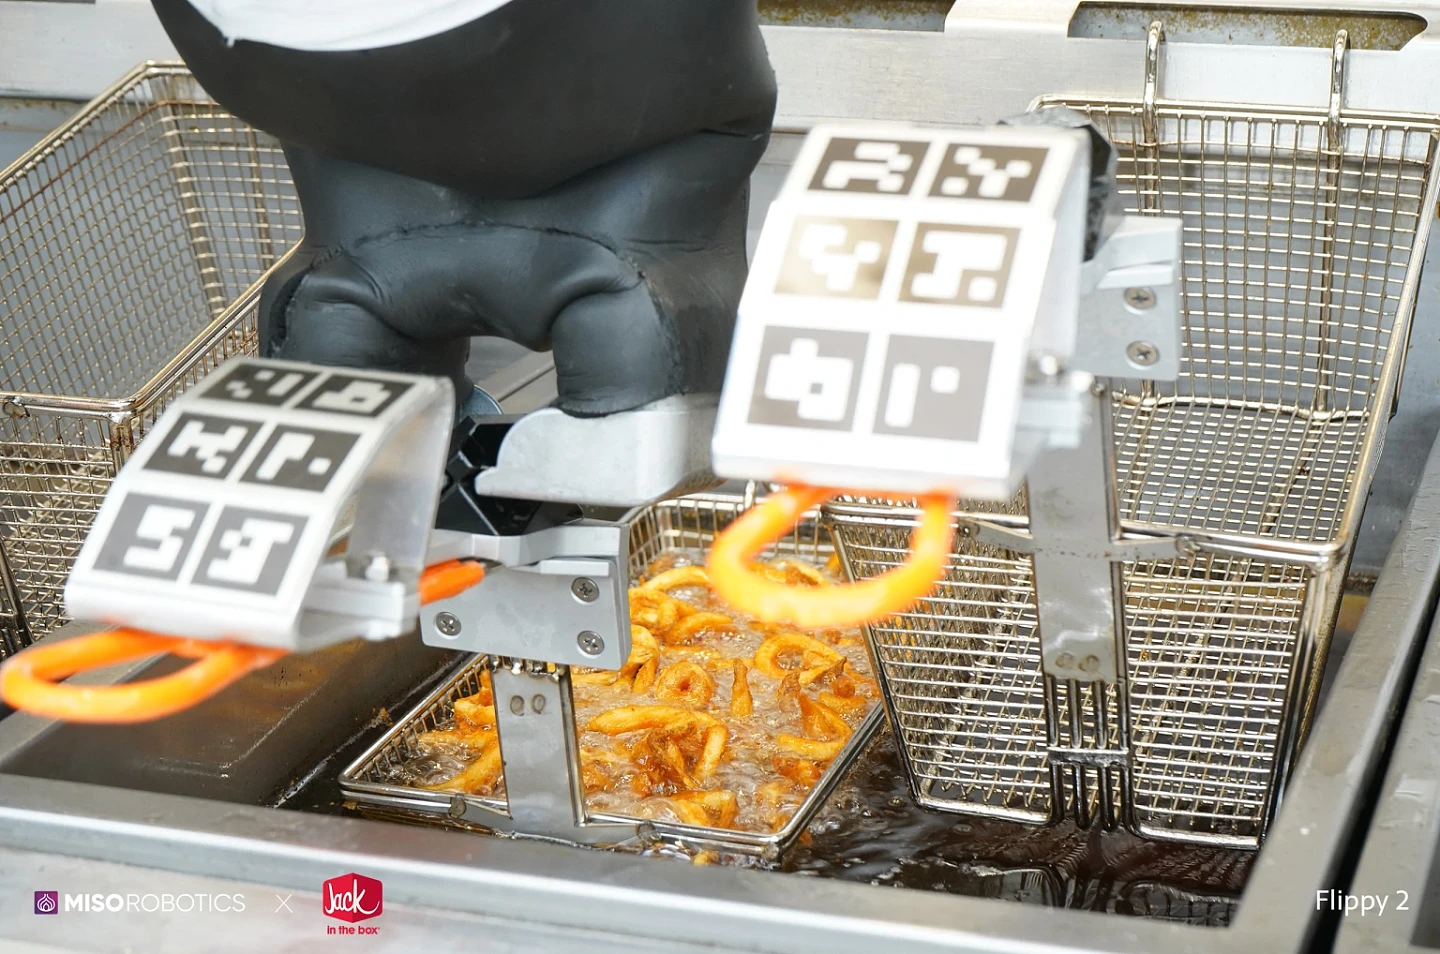 Miso-Robotics-Flippy-2-x-Jack-in-the-Box-Cooking-Curly-Fries.webp